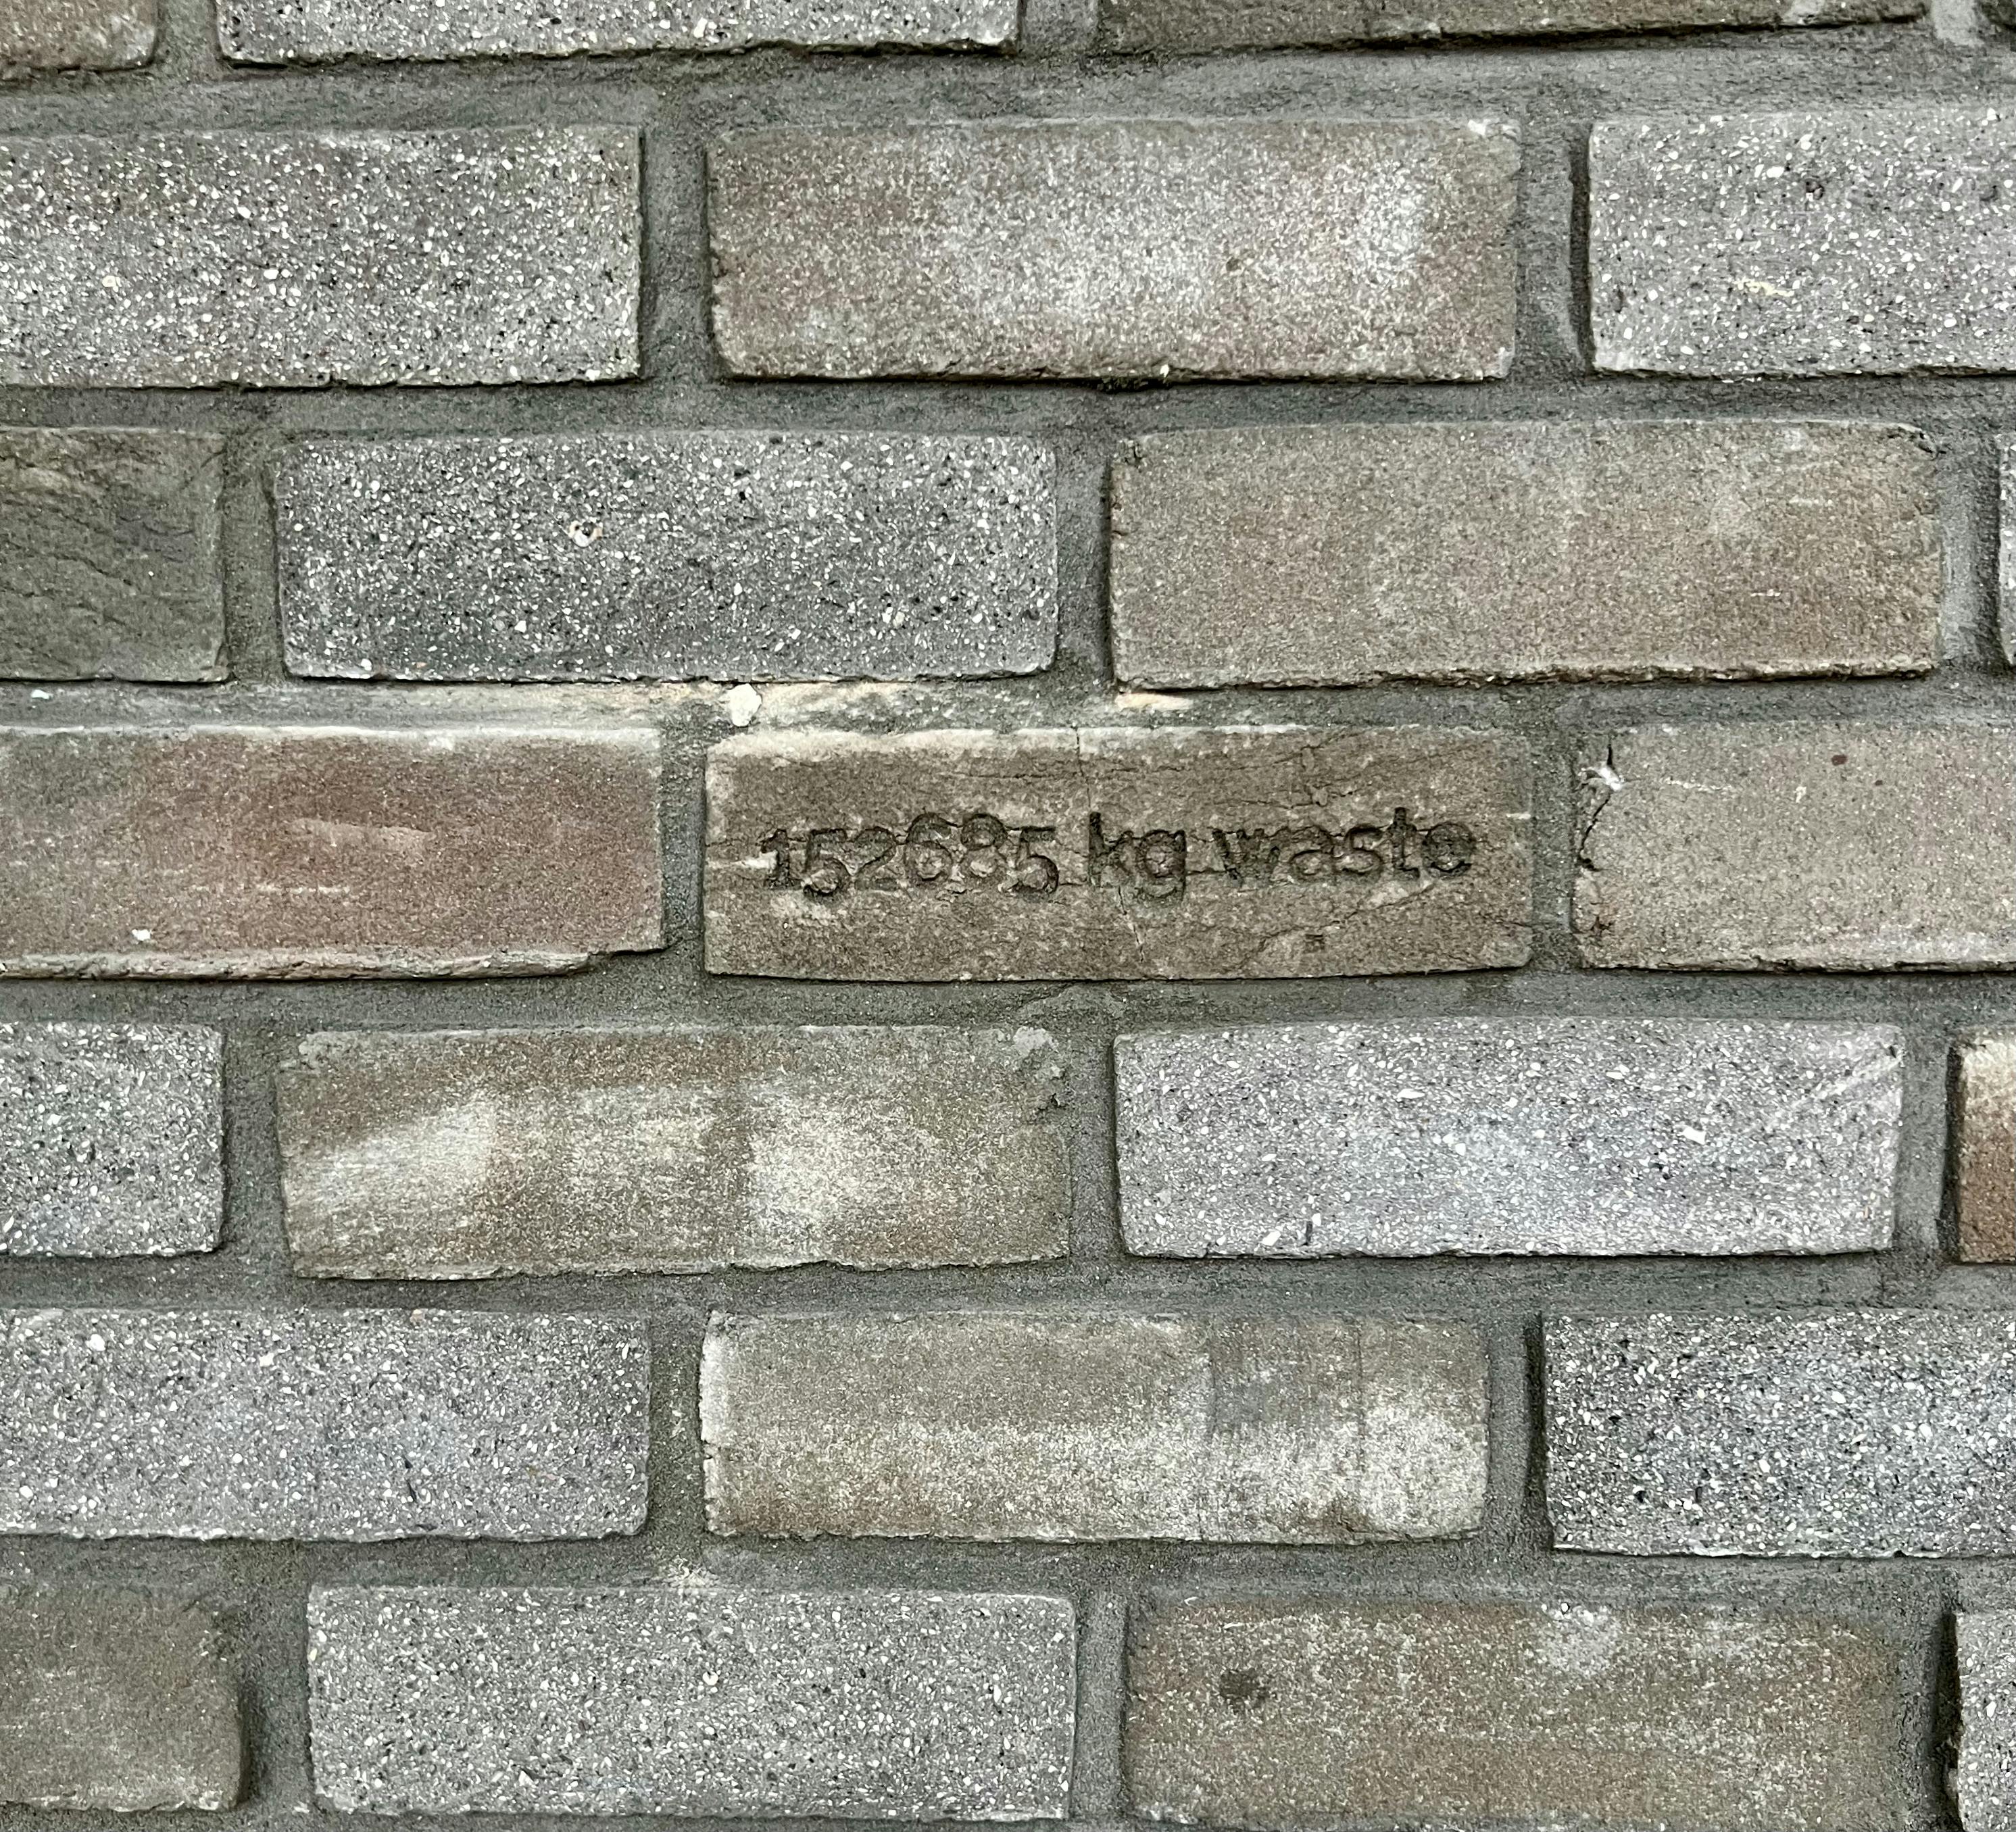 152685 kg of waste material got recycled in one new buildings bricks